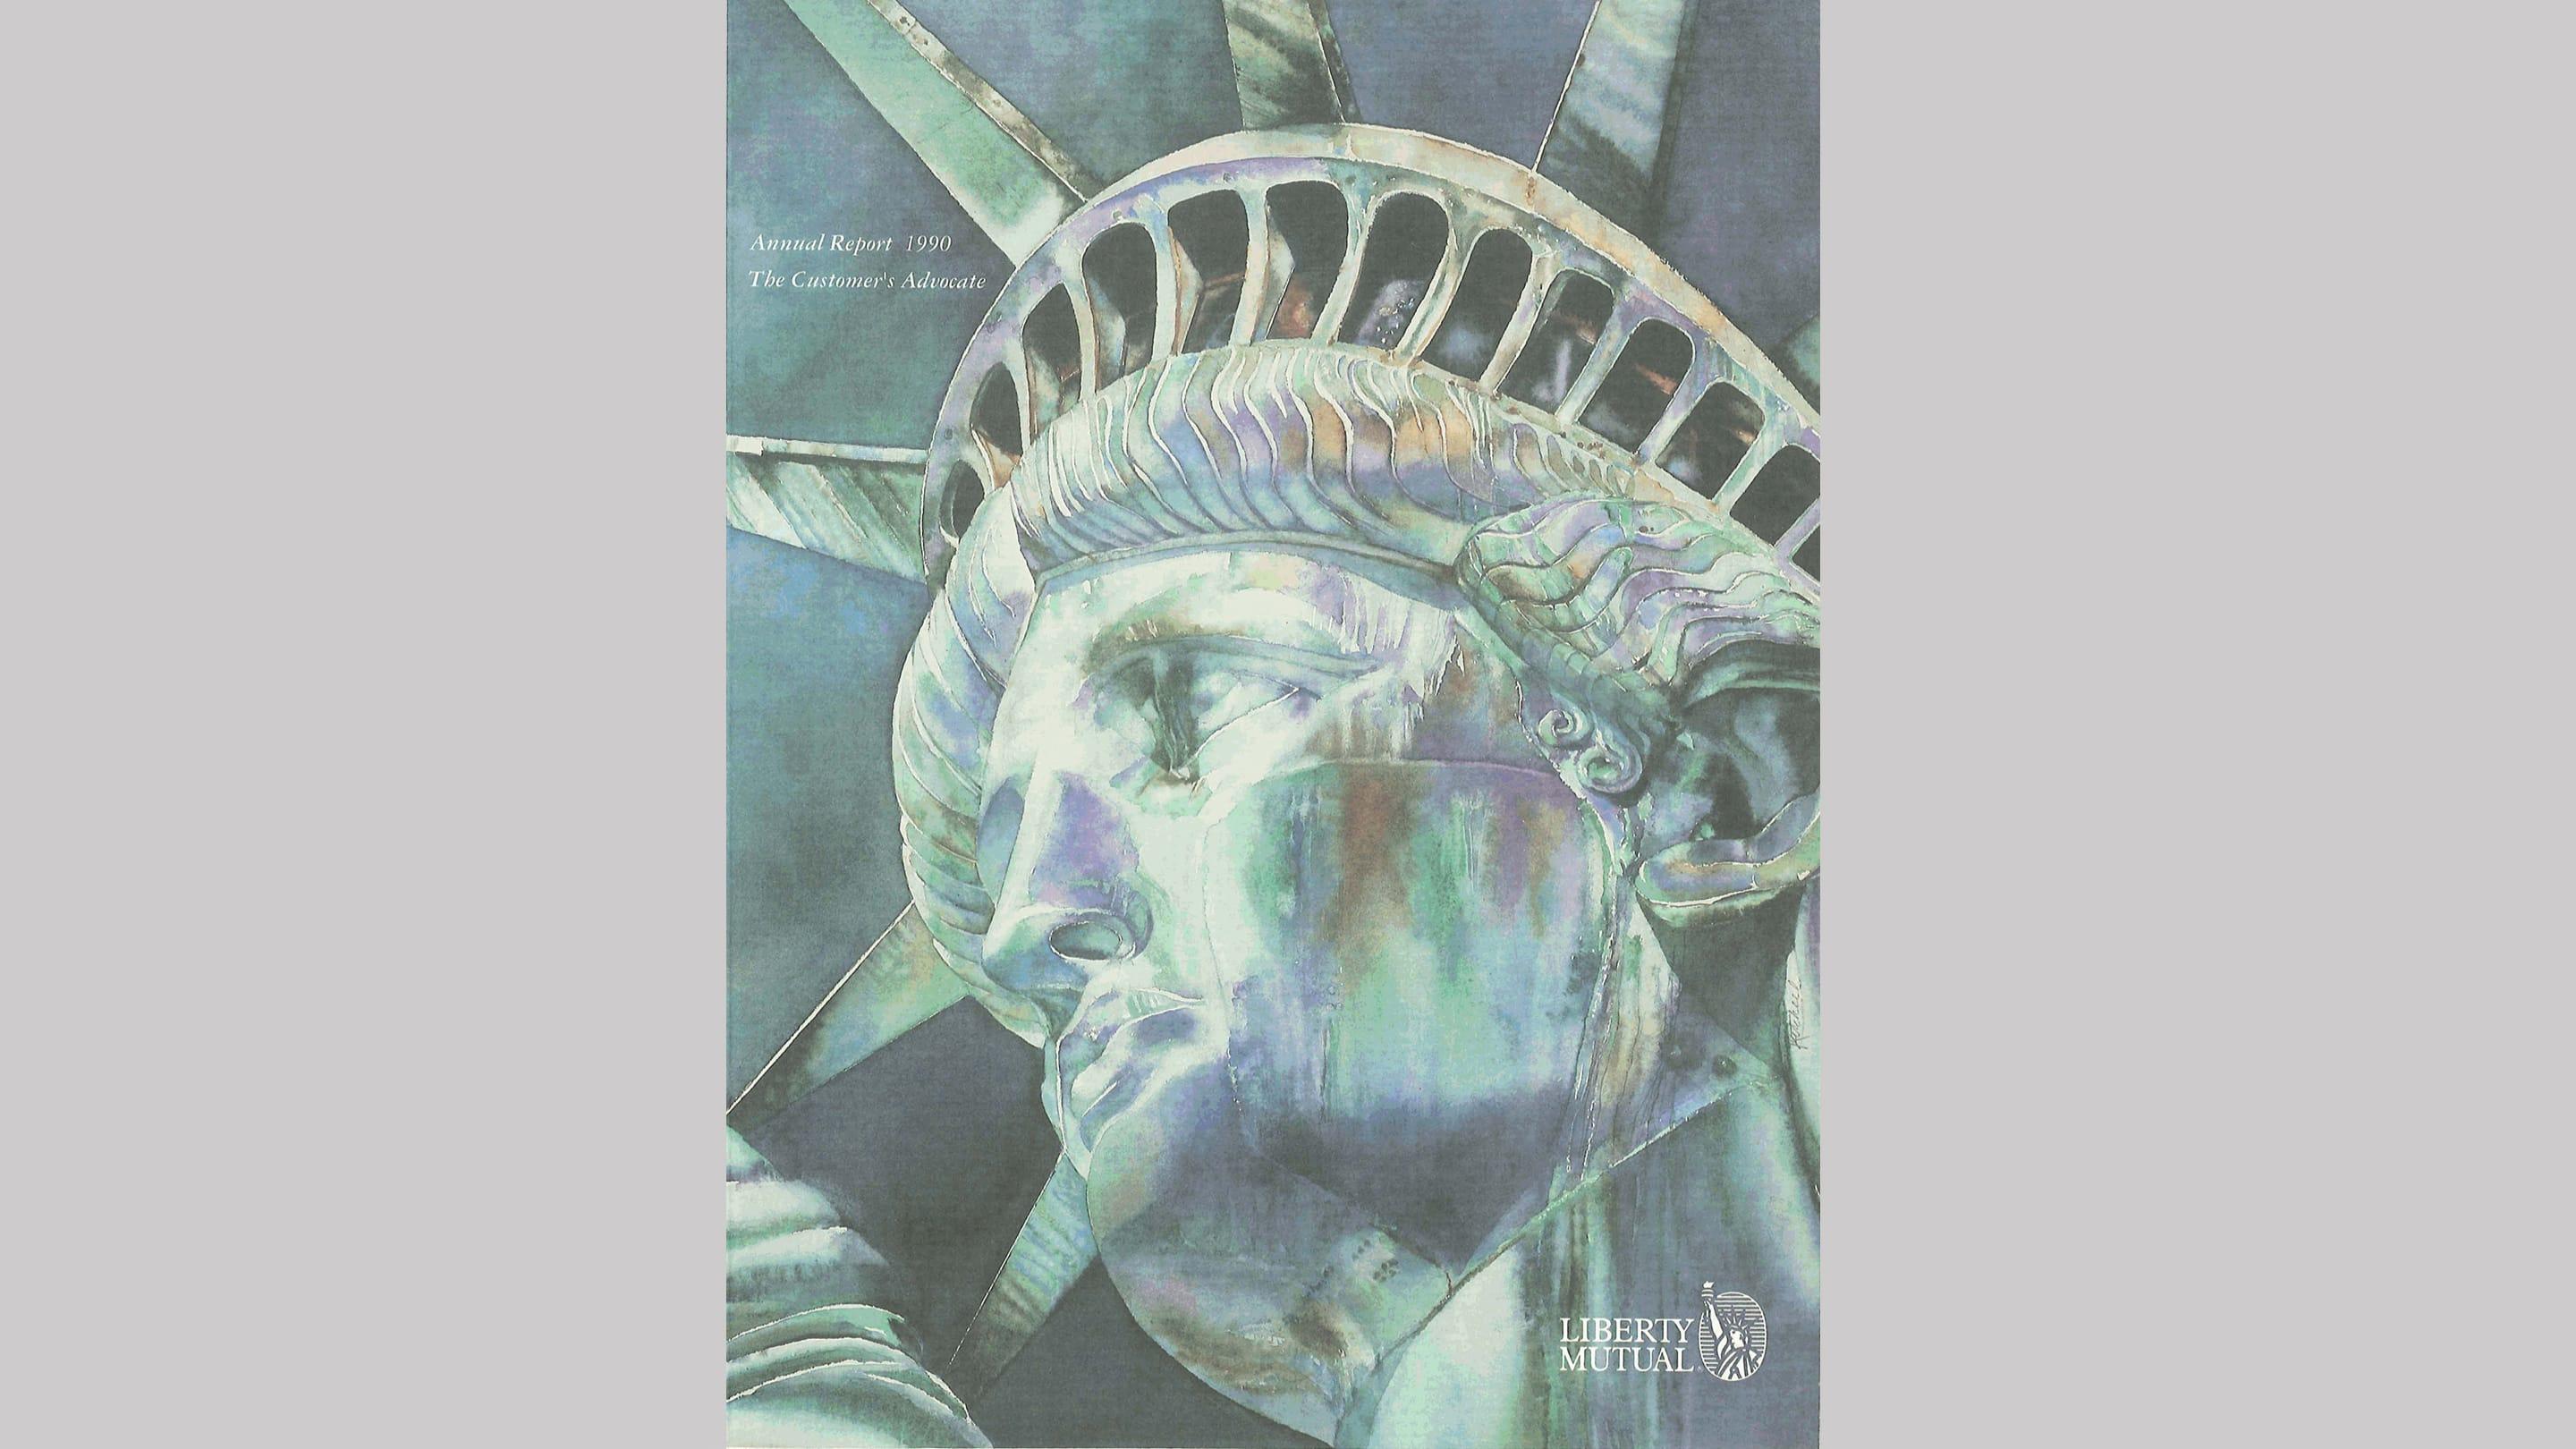 (slide 10 of 12) A 1990 annual report cover by Liberty Mutual Insurance featuring a close up of the statue of liberty's face . 